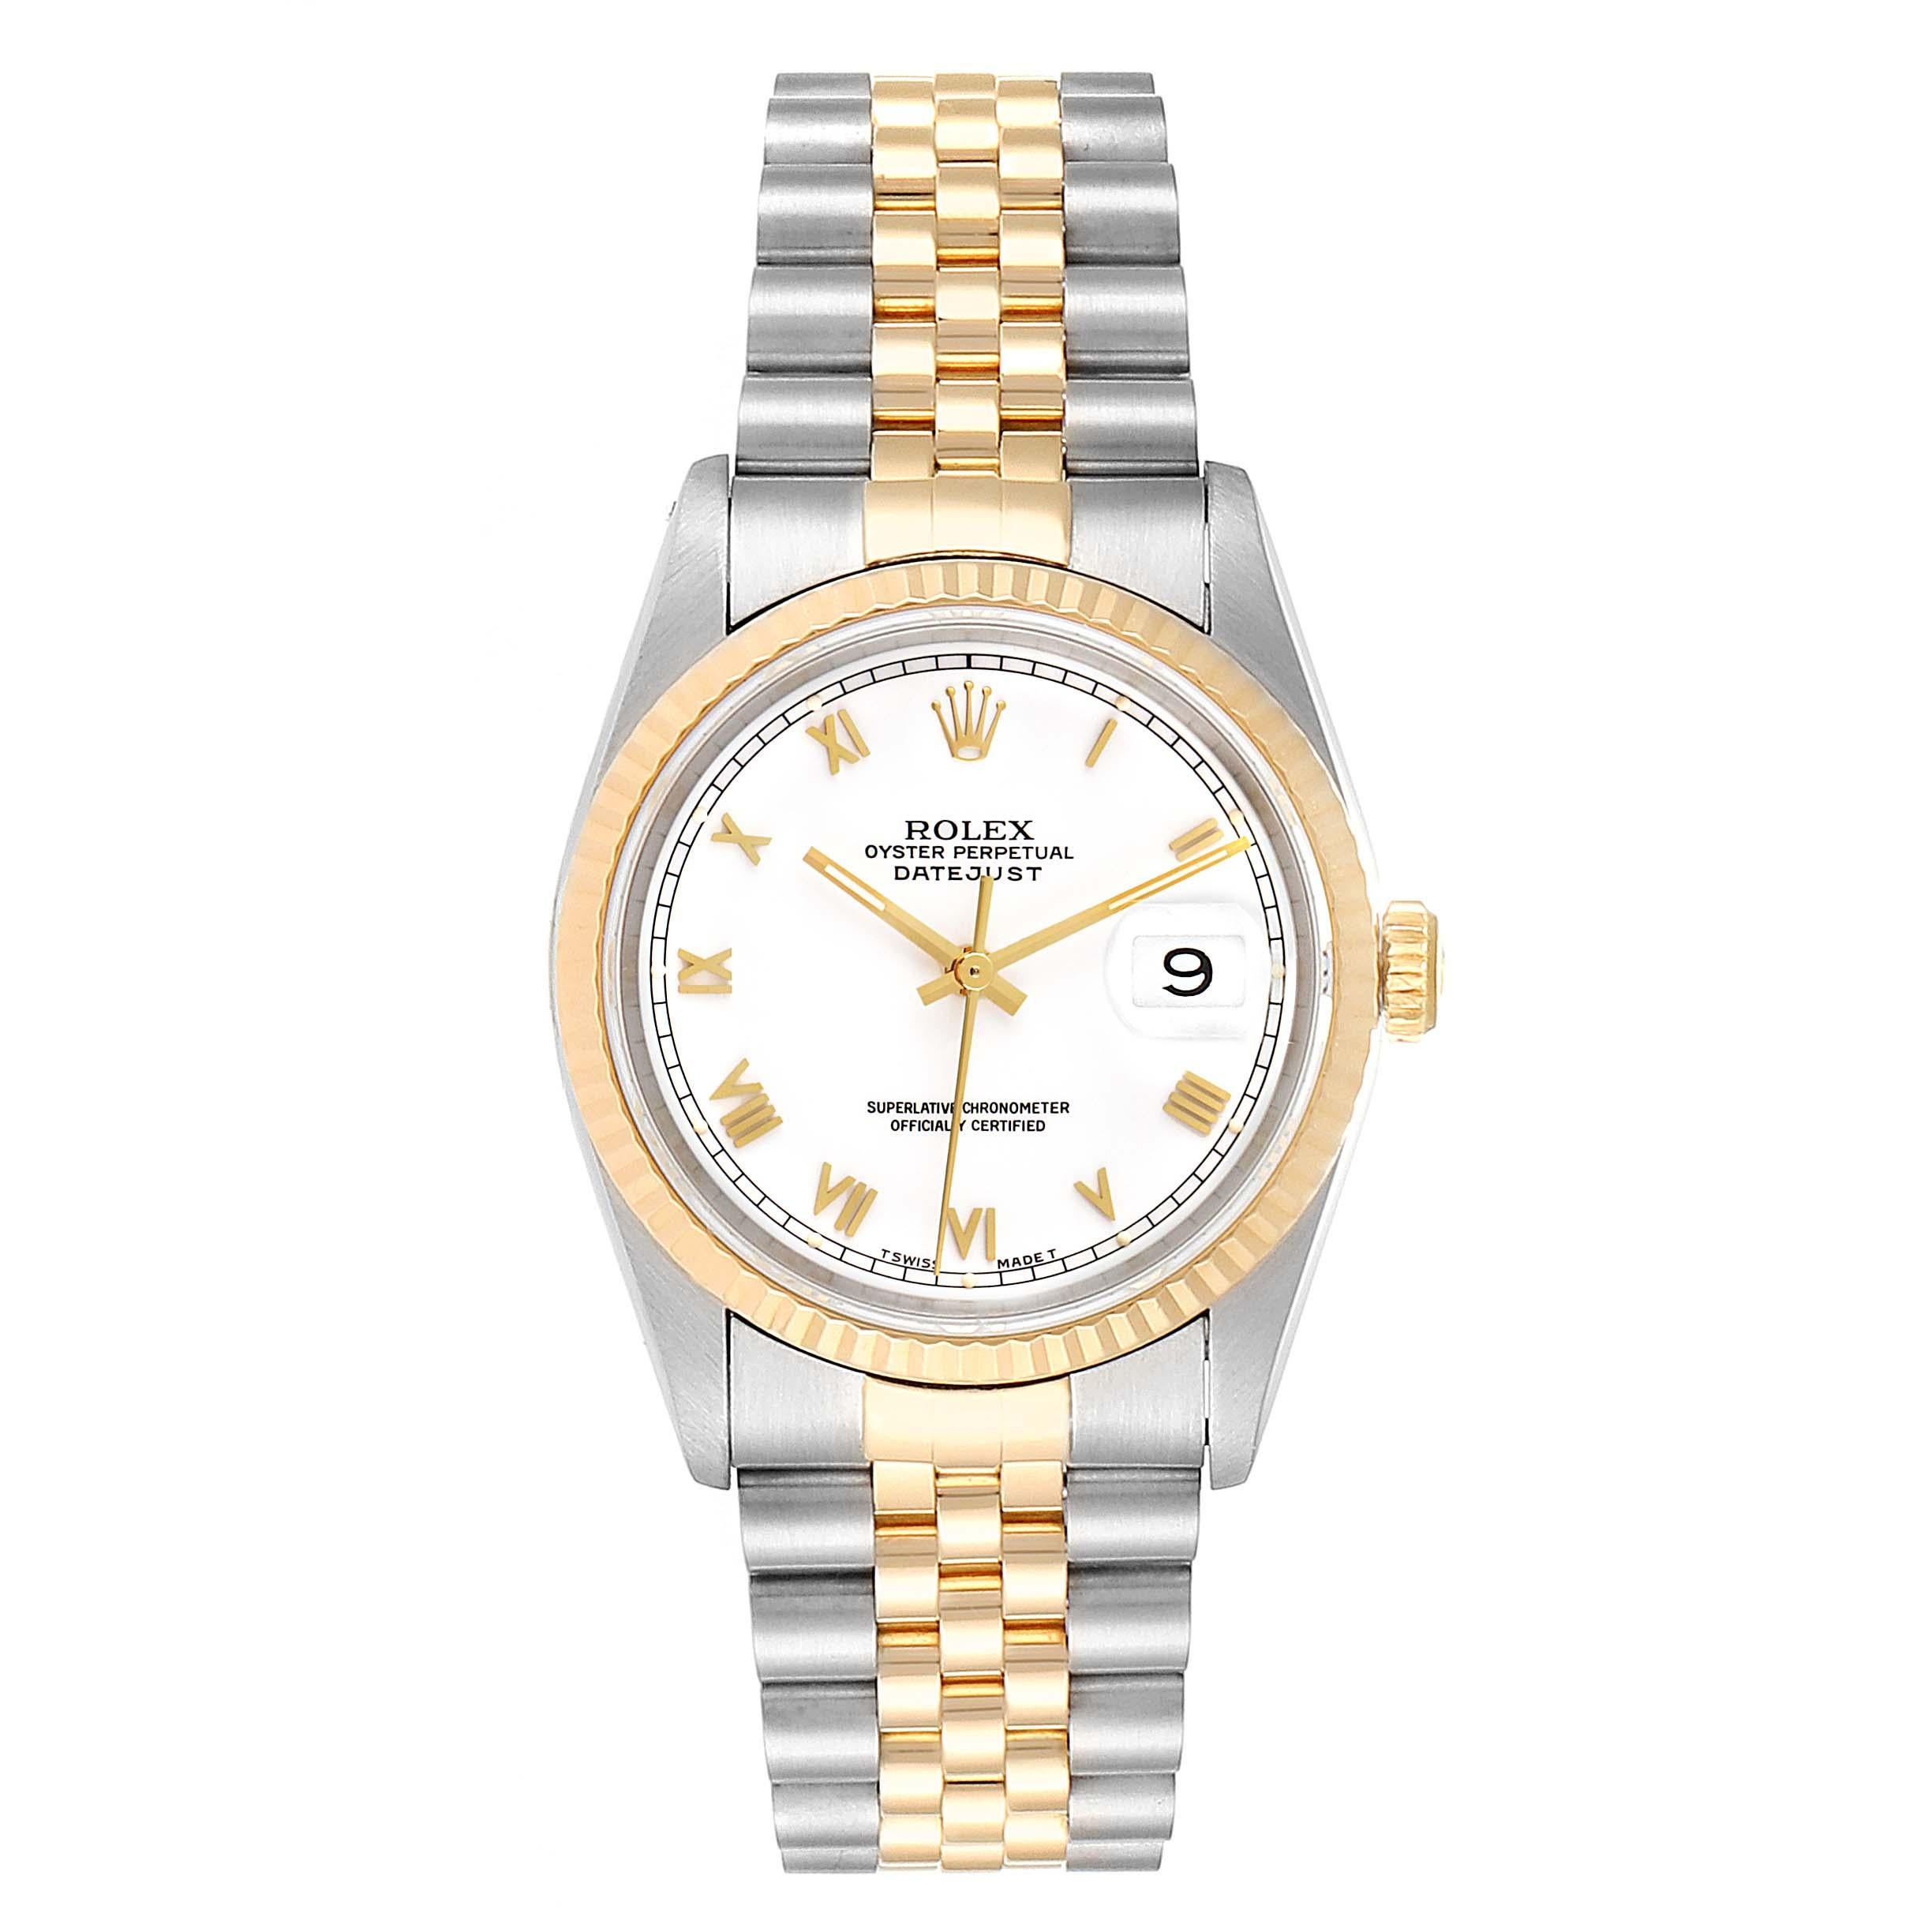 Rolex Datejust 36mm Steel Yellow Gold White Dial Mens Watch 16233. Officially certified chronometer self-winding movement. Stainless steel case 36 mm in diameter. Rolex logo on a 18K yellow gold crown. 18k yellow gold fluted bezel. Scratch resistant